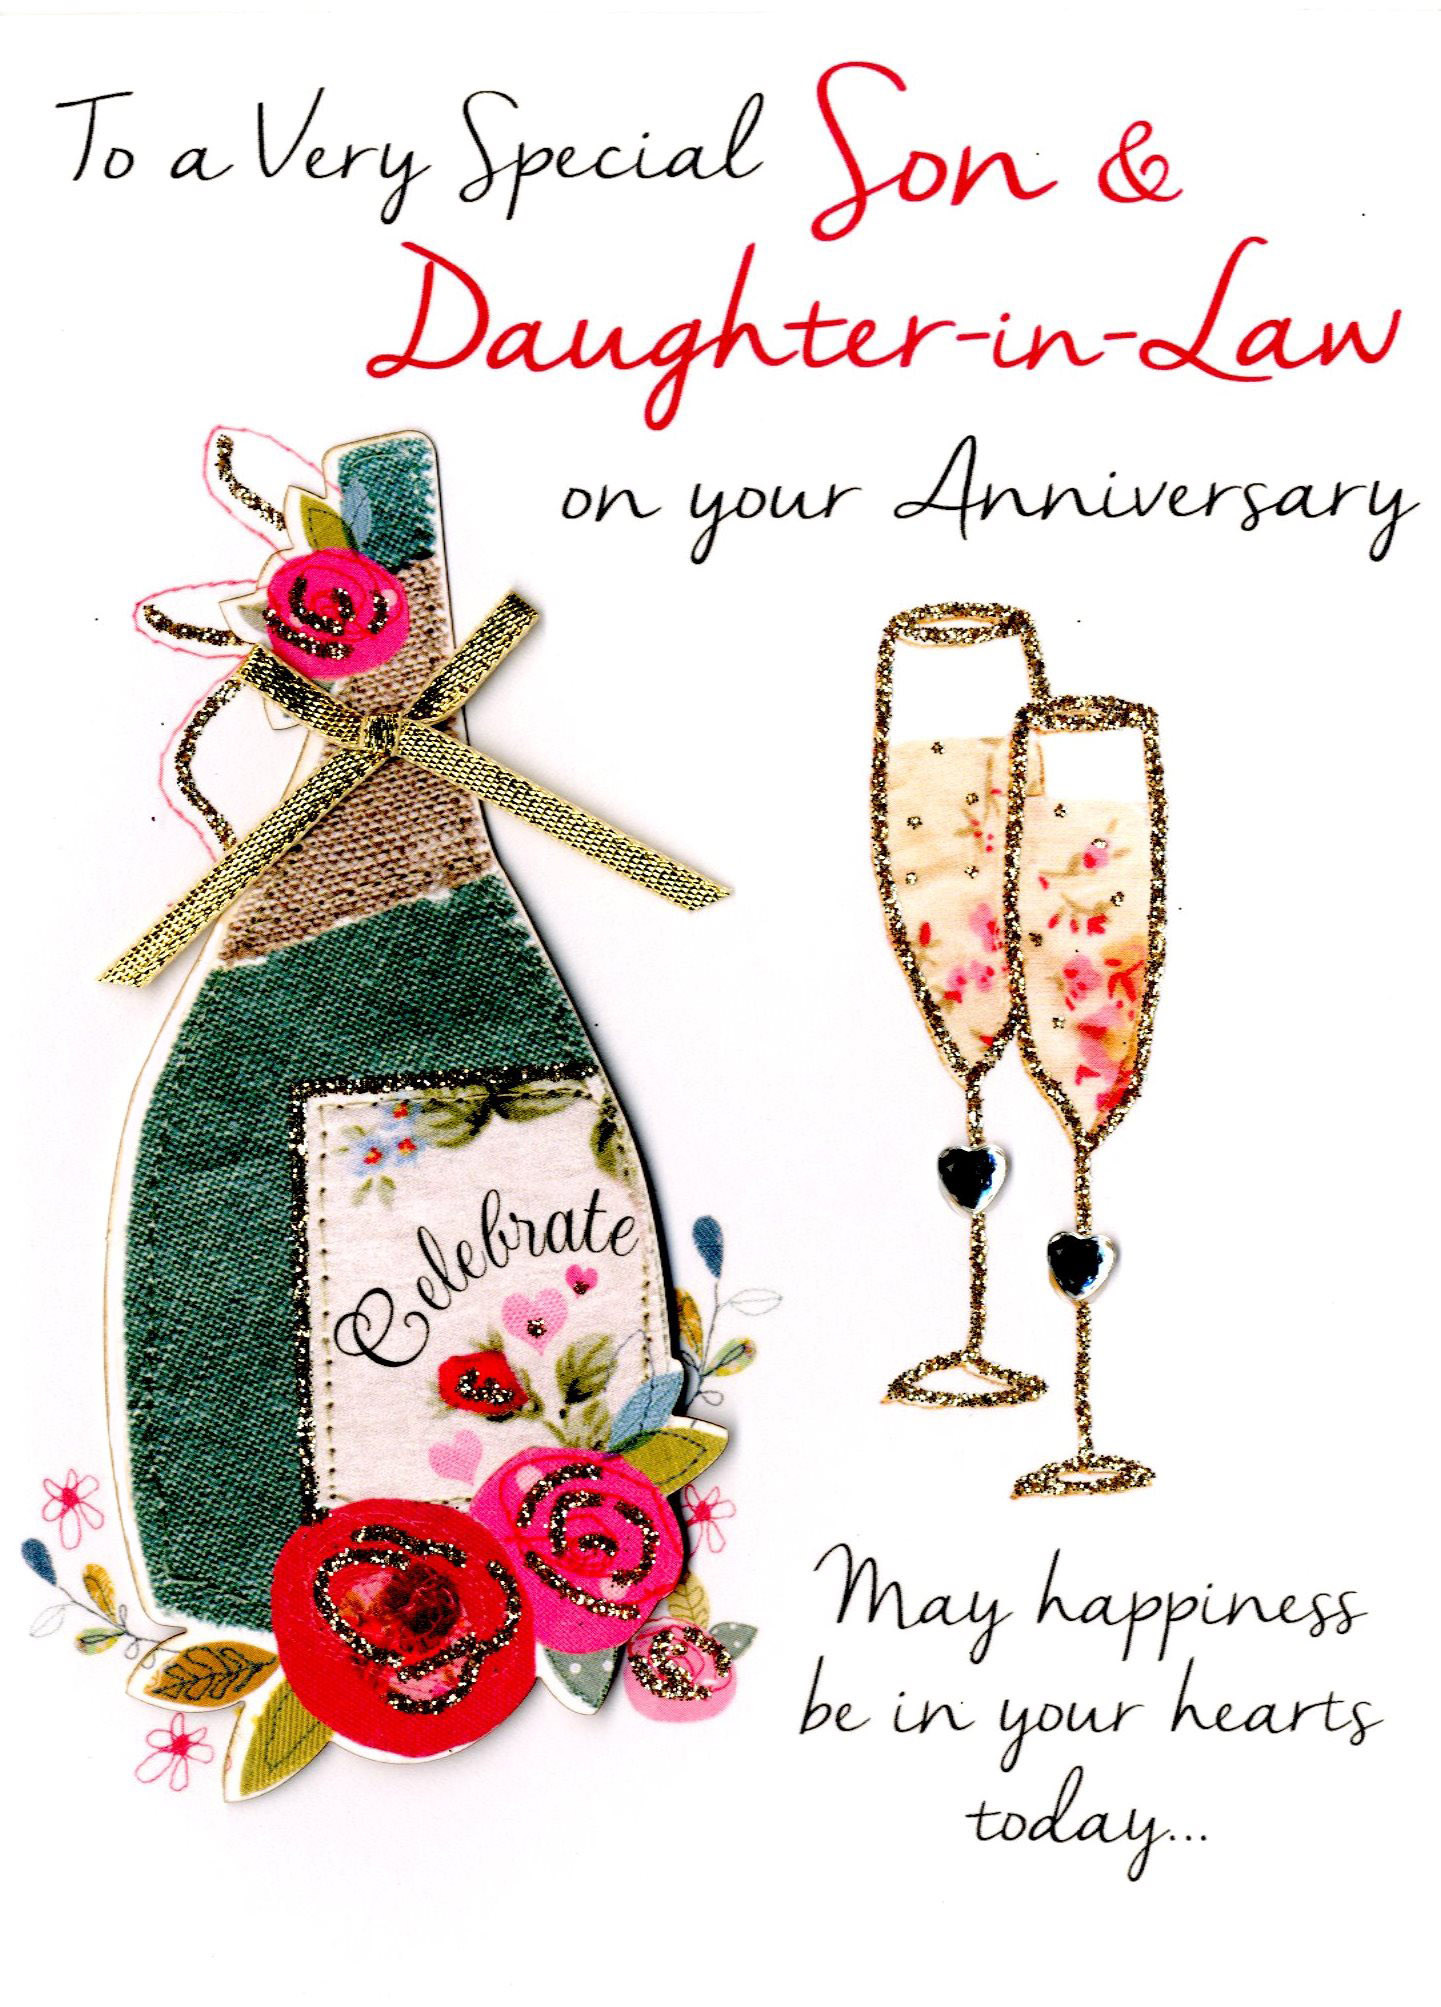 Happy Anniversary Quotes For Daughter And Son In Law
 Son & Daughter In Law Anniversary Greeting Card